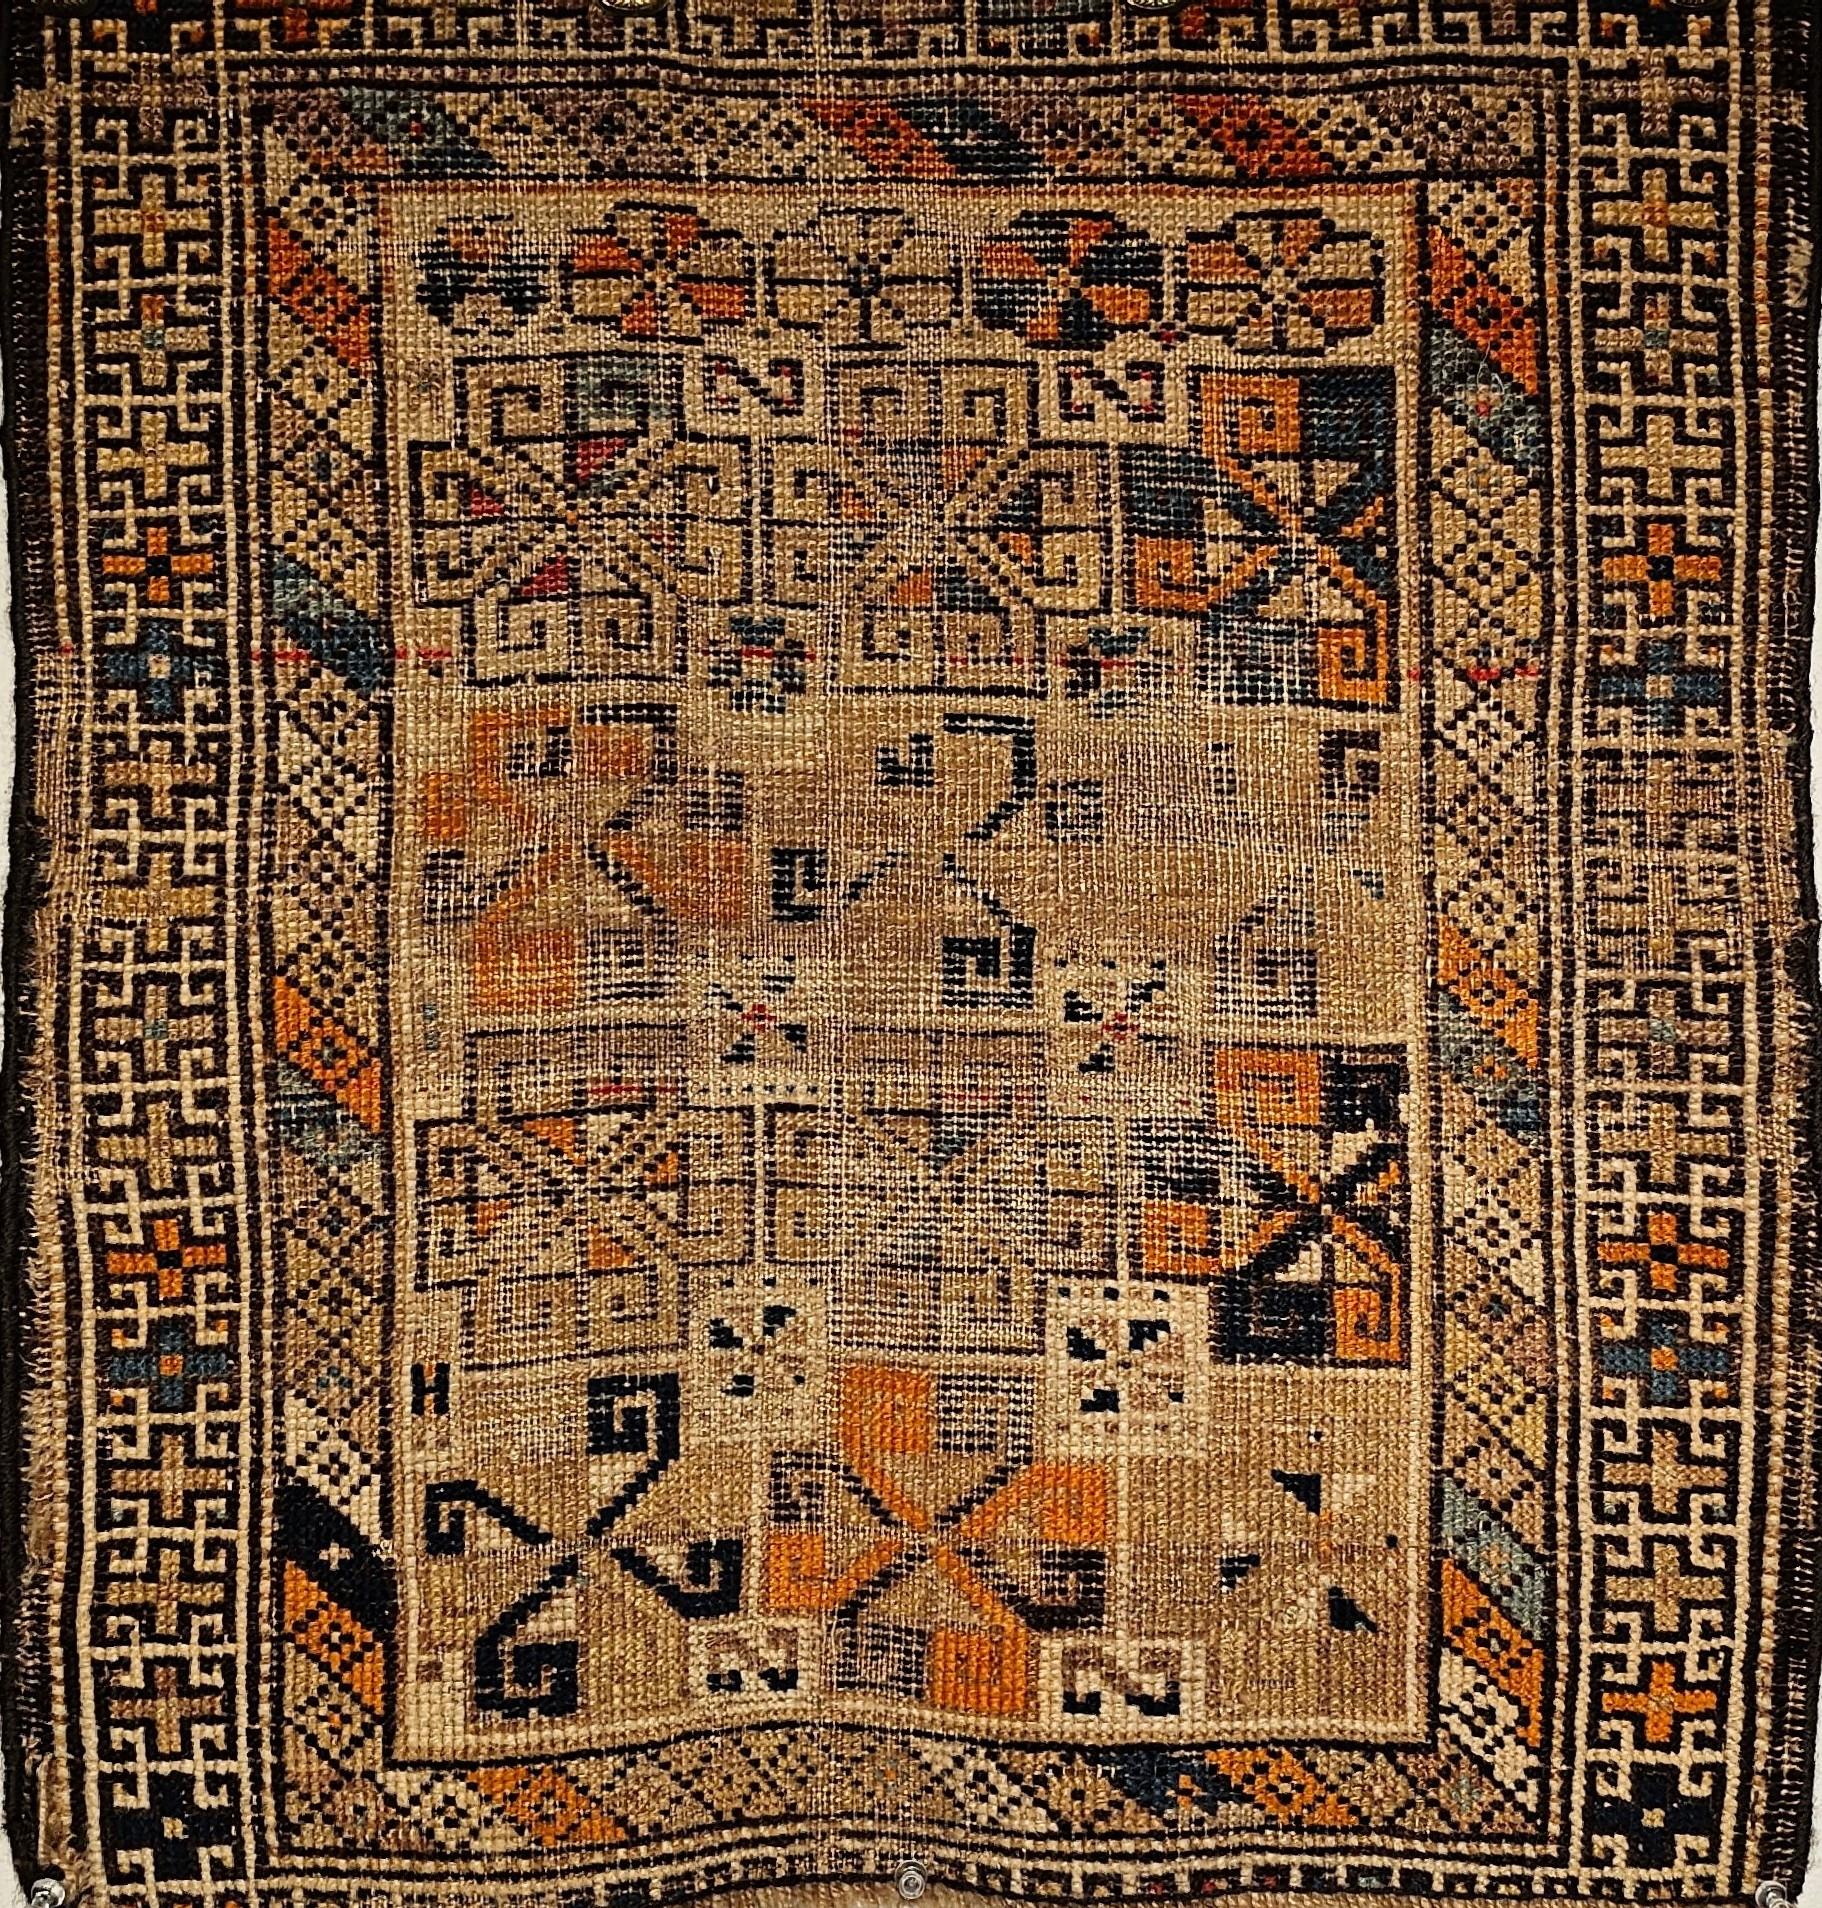  A beautiful Caucasian Kazak bagface from the late 1800s.  The rare small Kazak rug could have been woven to be used as a bagface or a prayer rug.  The freestyle allover design is very appealing.  The combination of small size, design and the colors